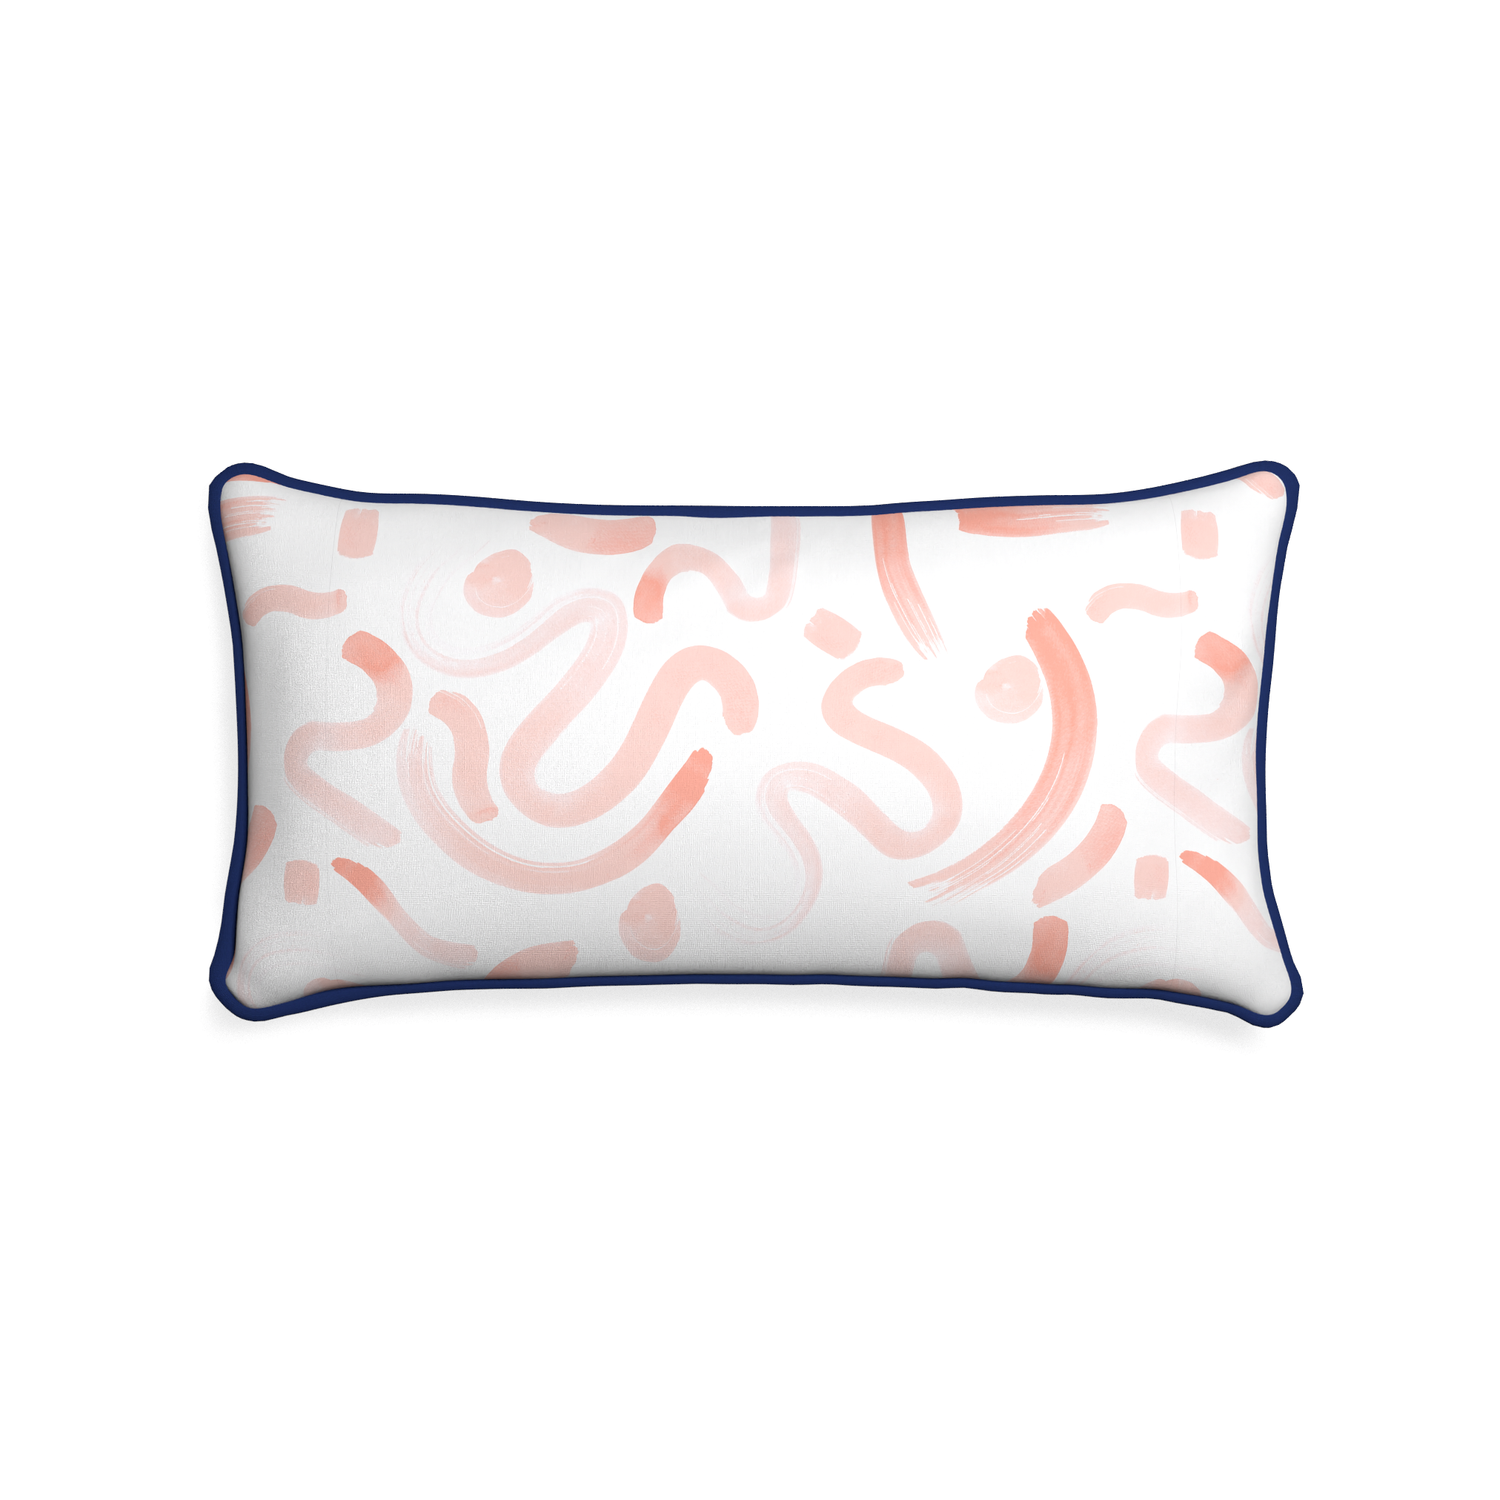 Midi-lumbar hockney pink custom pink graphicpillow with midnight piping on white background